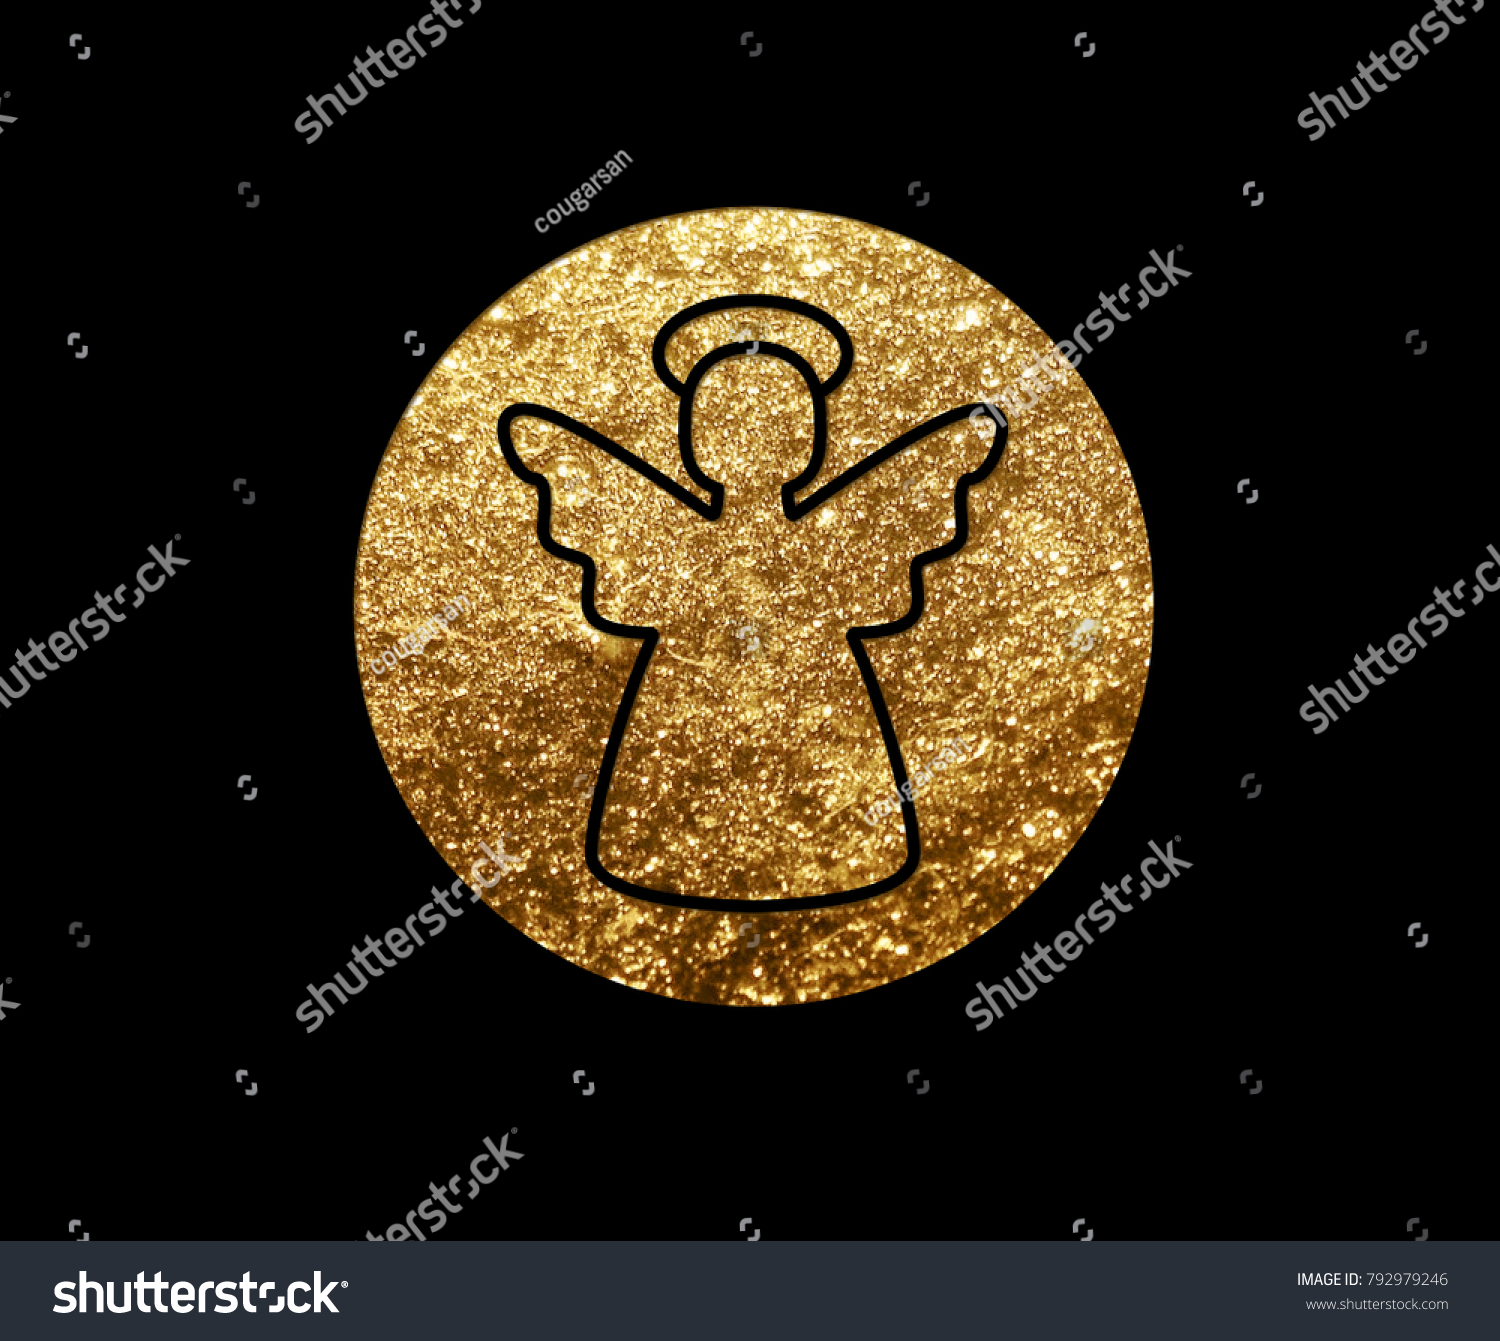 The isolated golden glitter Christmas angel flat icon on black background #792979246